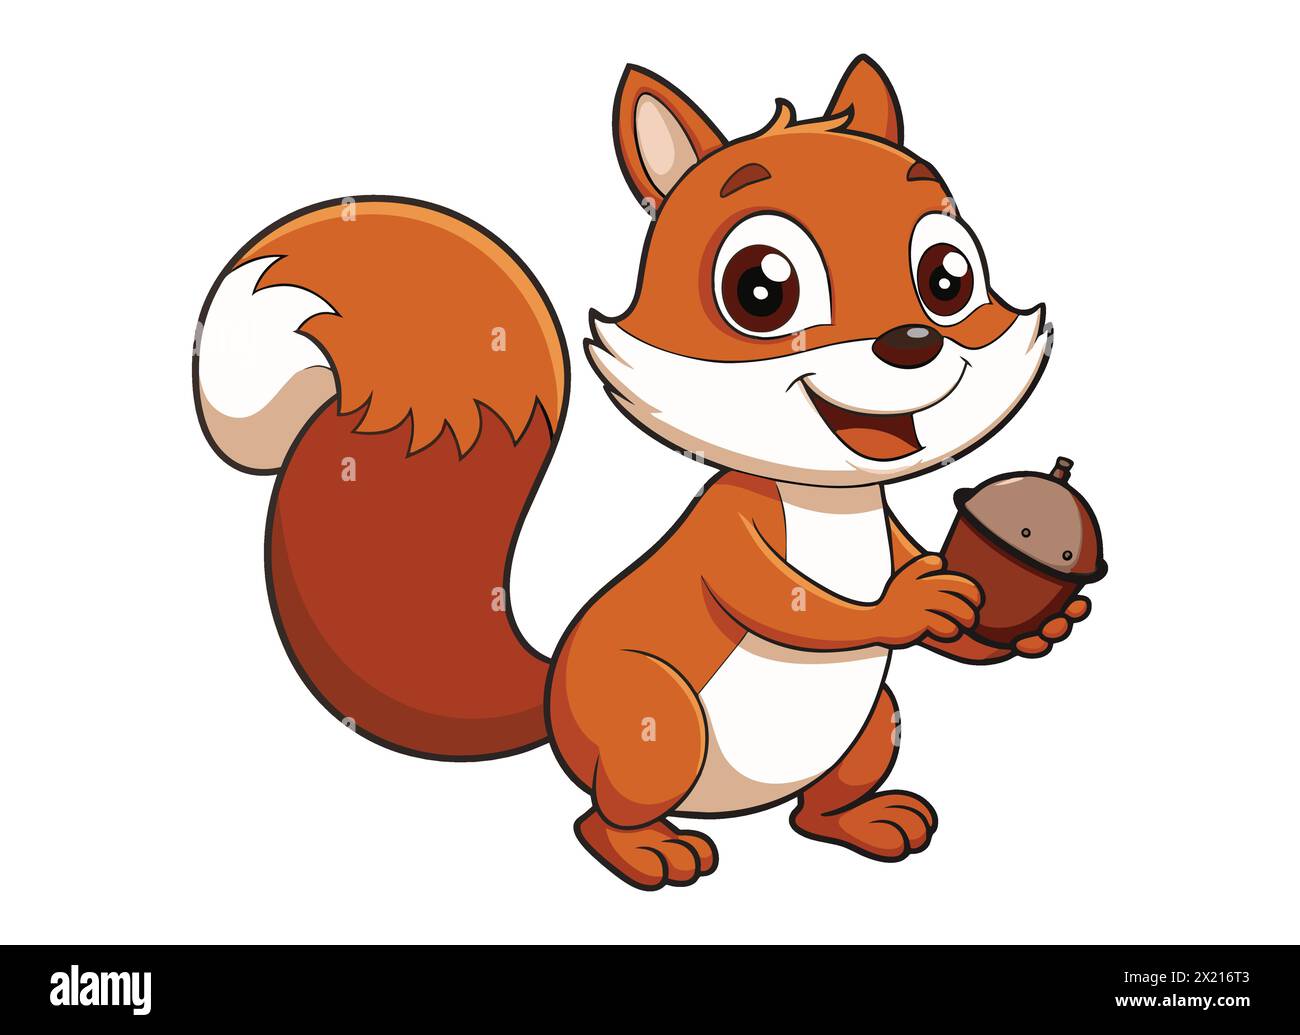 Cheerful Squirrel Holding Acorn. Playful Squirrel Cartoon. Adorable Squirrel Character with Nut Stock Vector